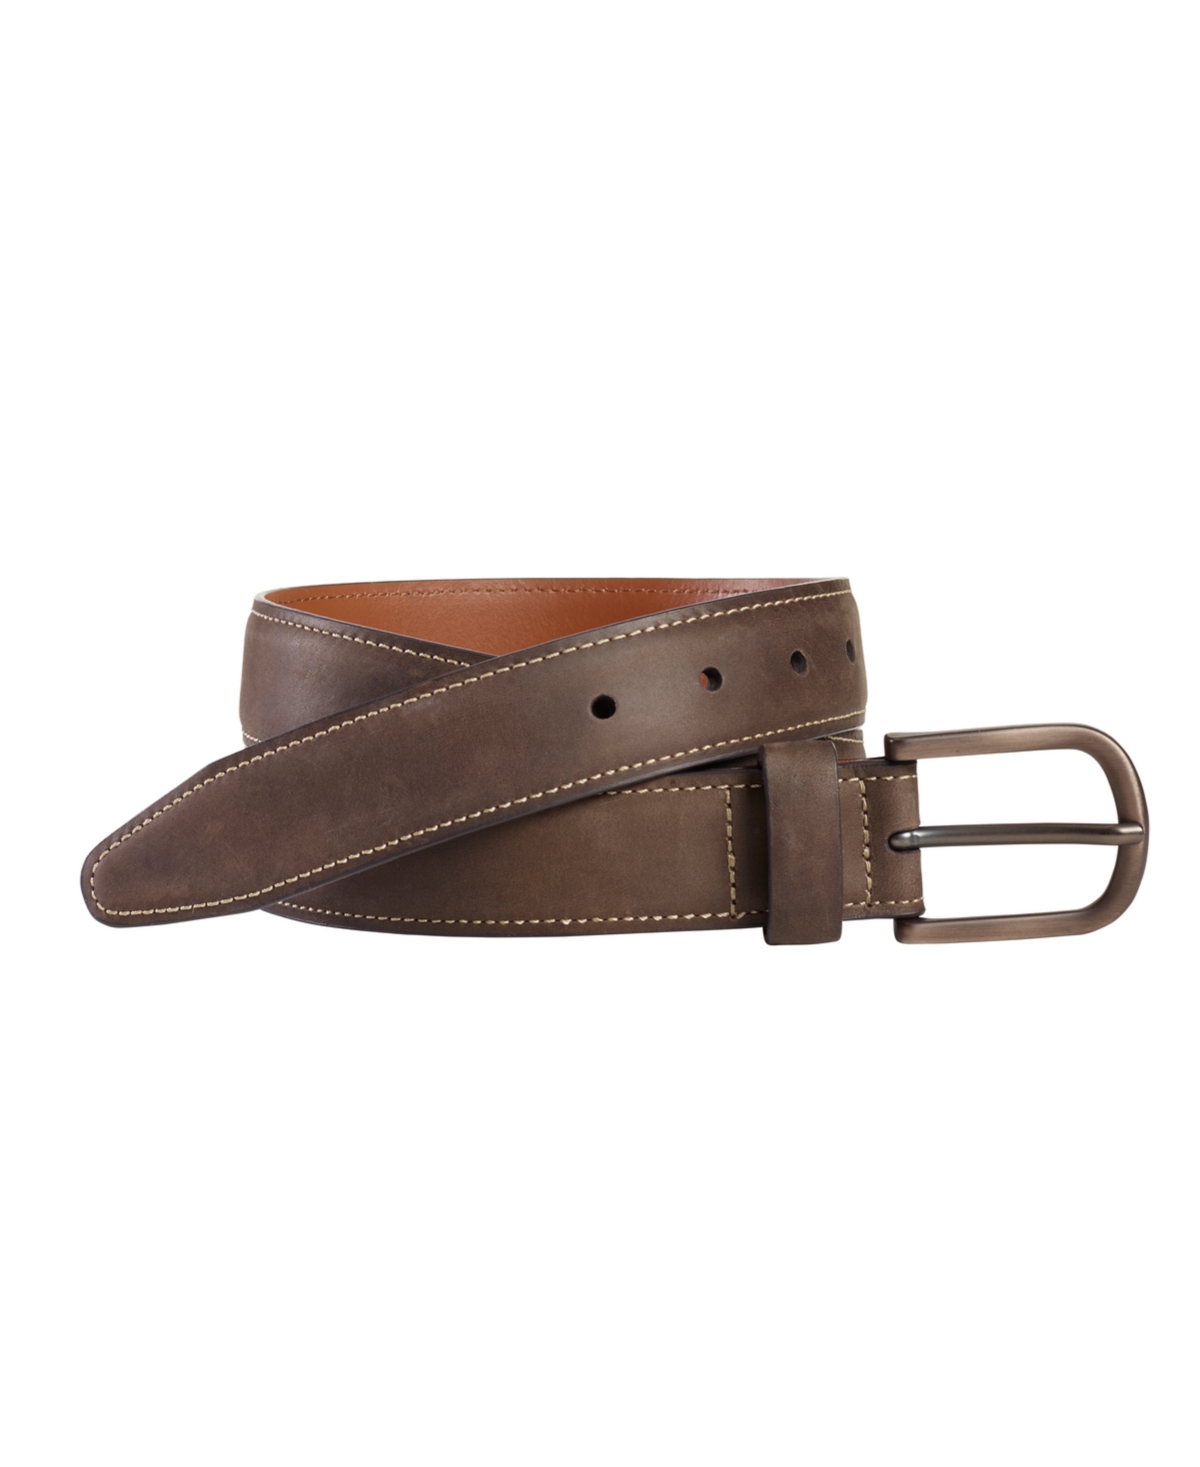 Men's Oiled Contrast Stitched Belt - Brown Oiled Leather